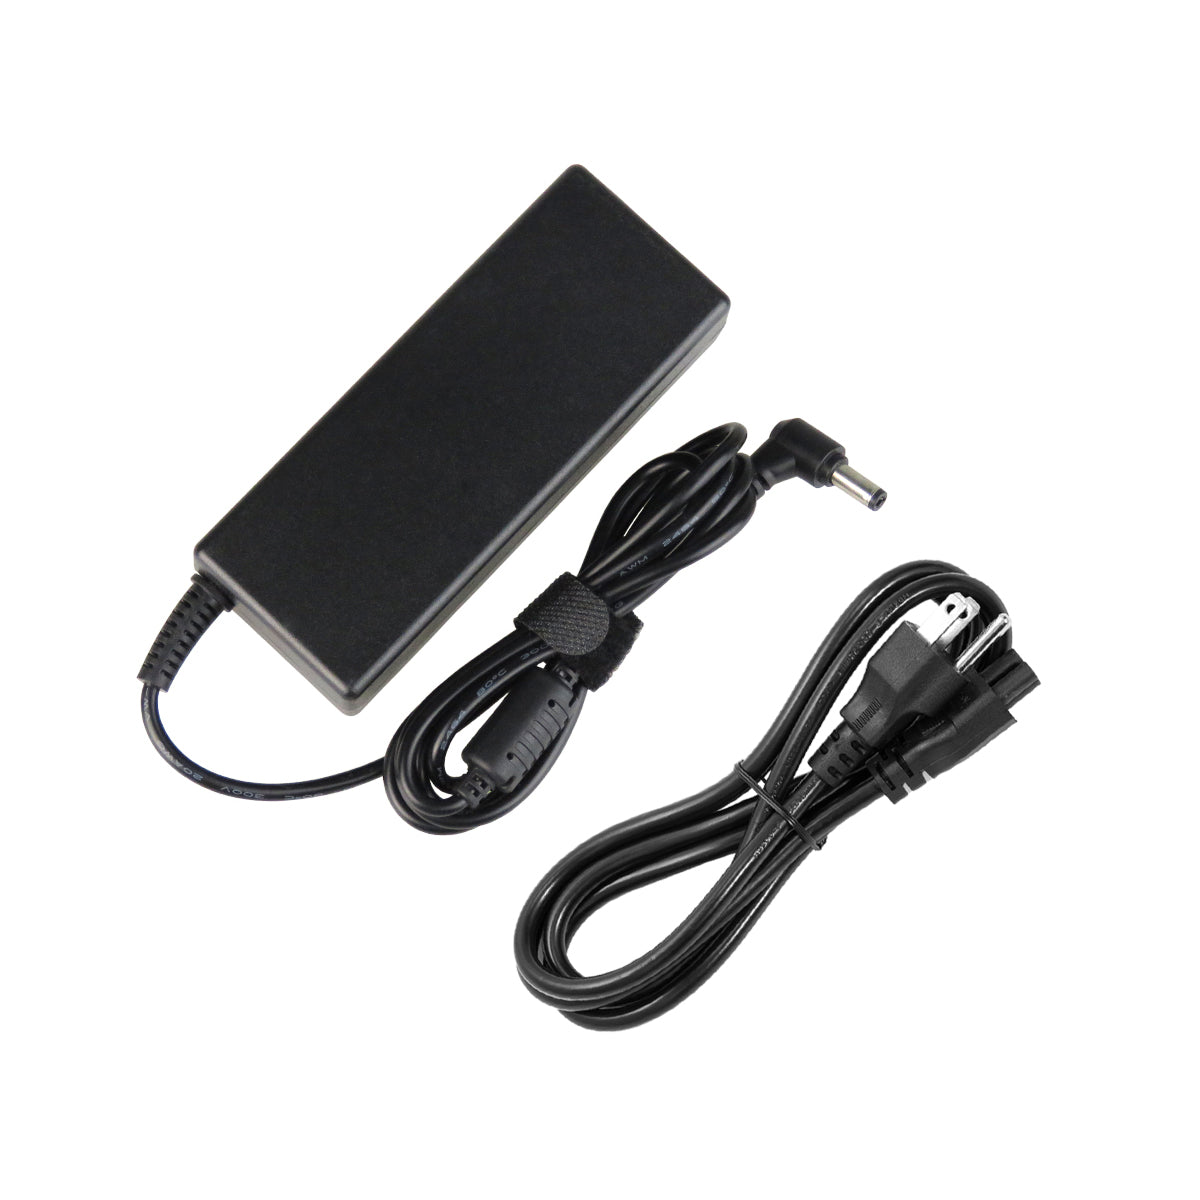 AC Adapter Charger for Gateway MX8523 Notebook.